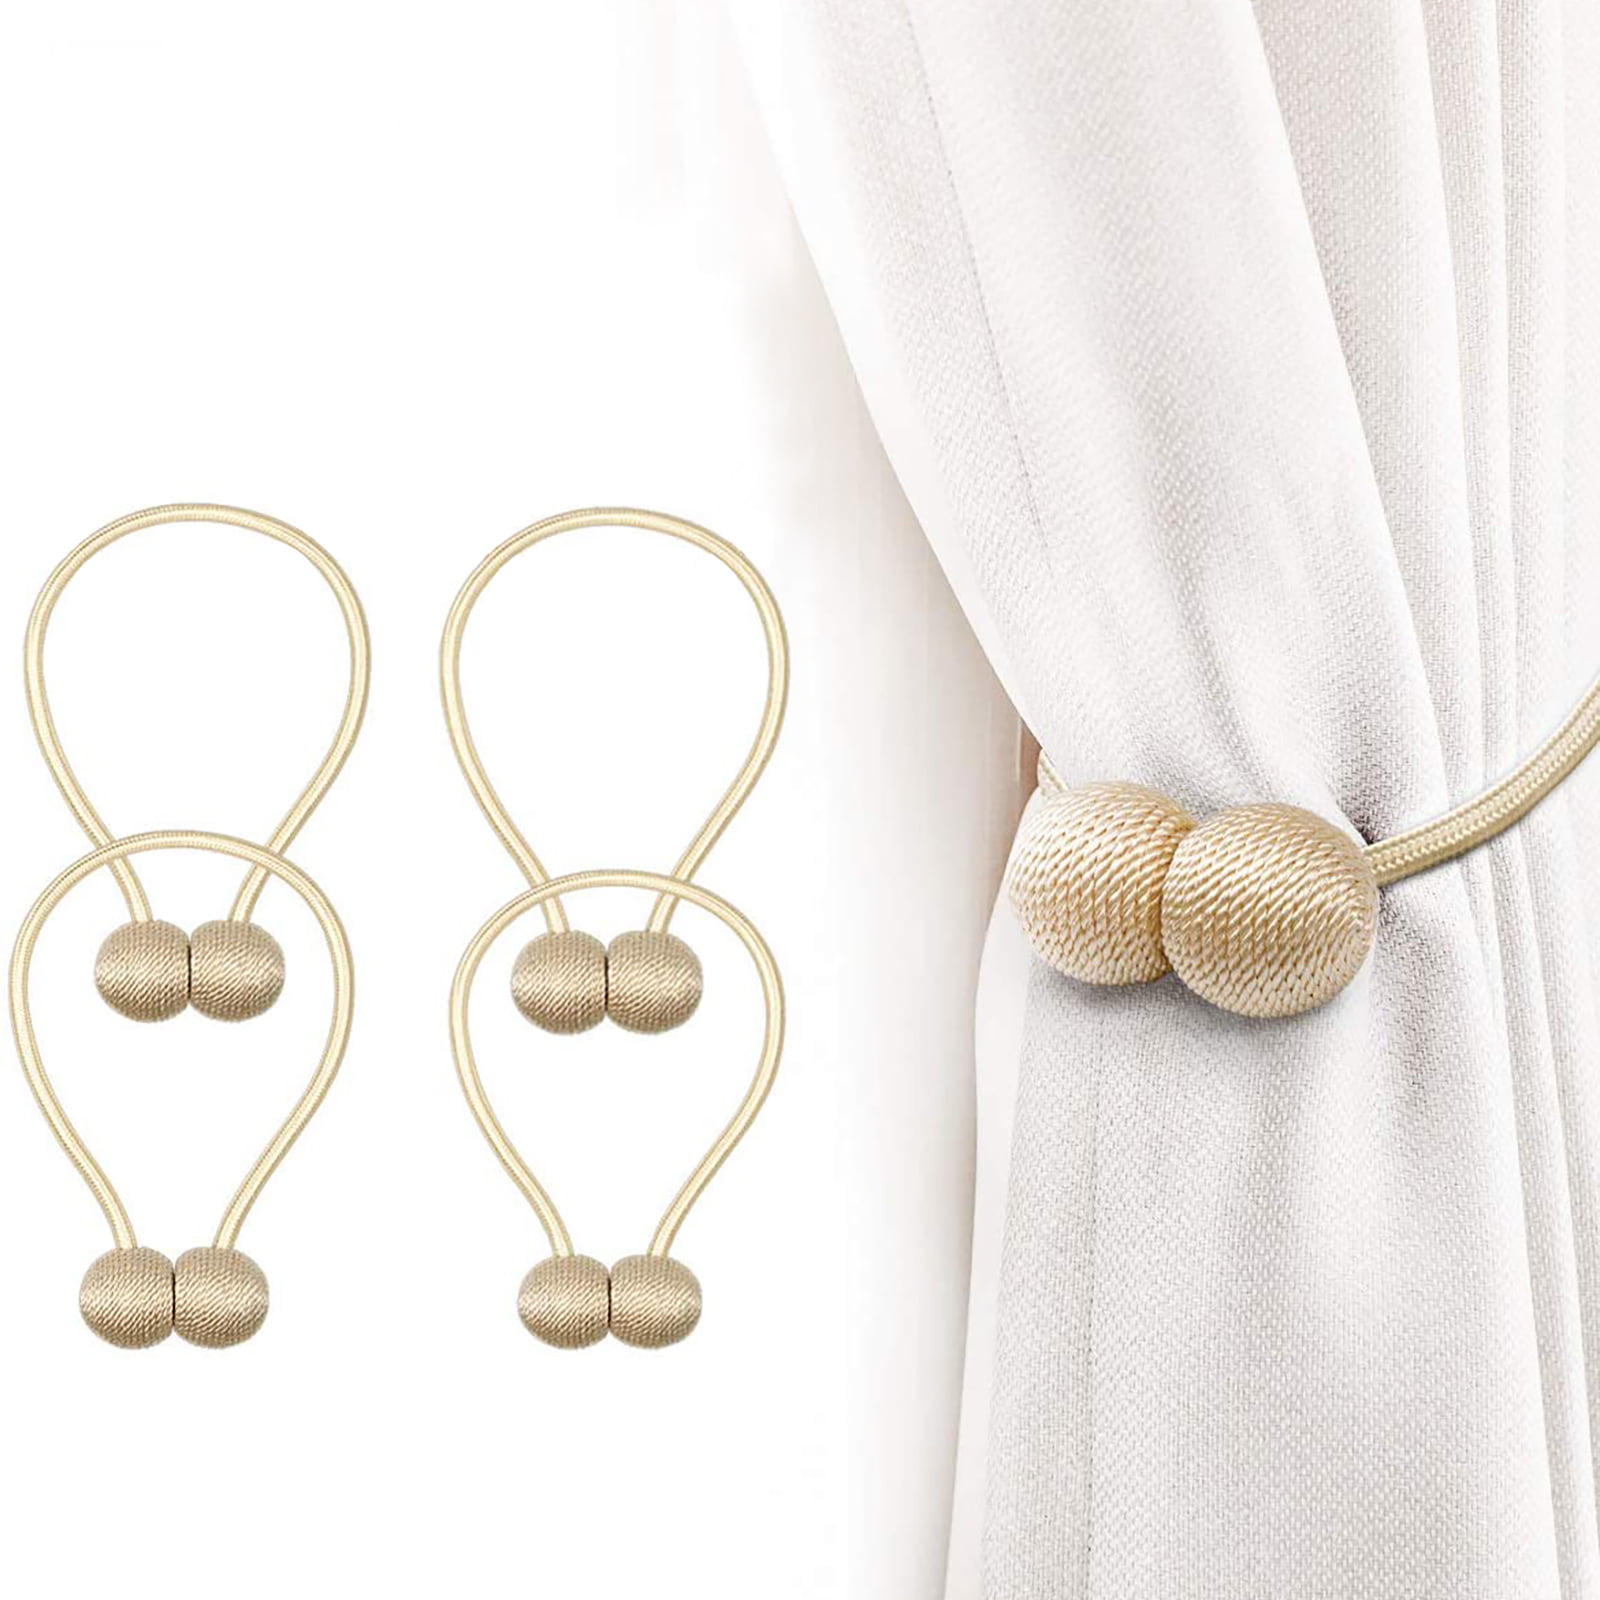 Details about   2X Strong Magnetic Curtain Tie Backs Buckle Clips Holdbacks Rope Tiebacks Home 